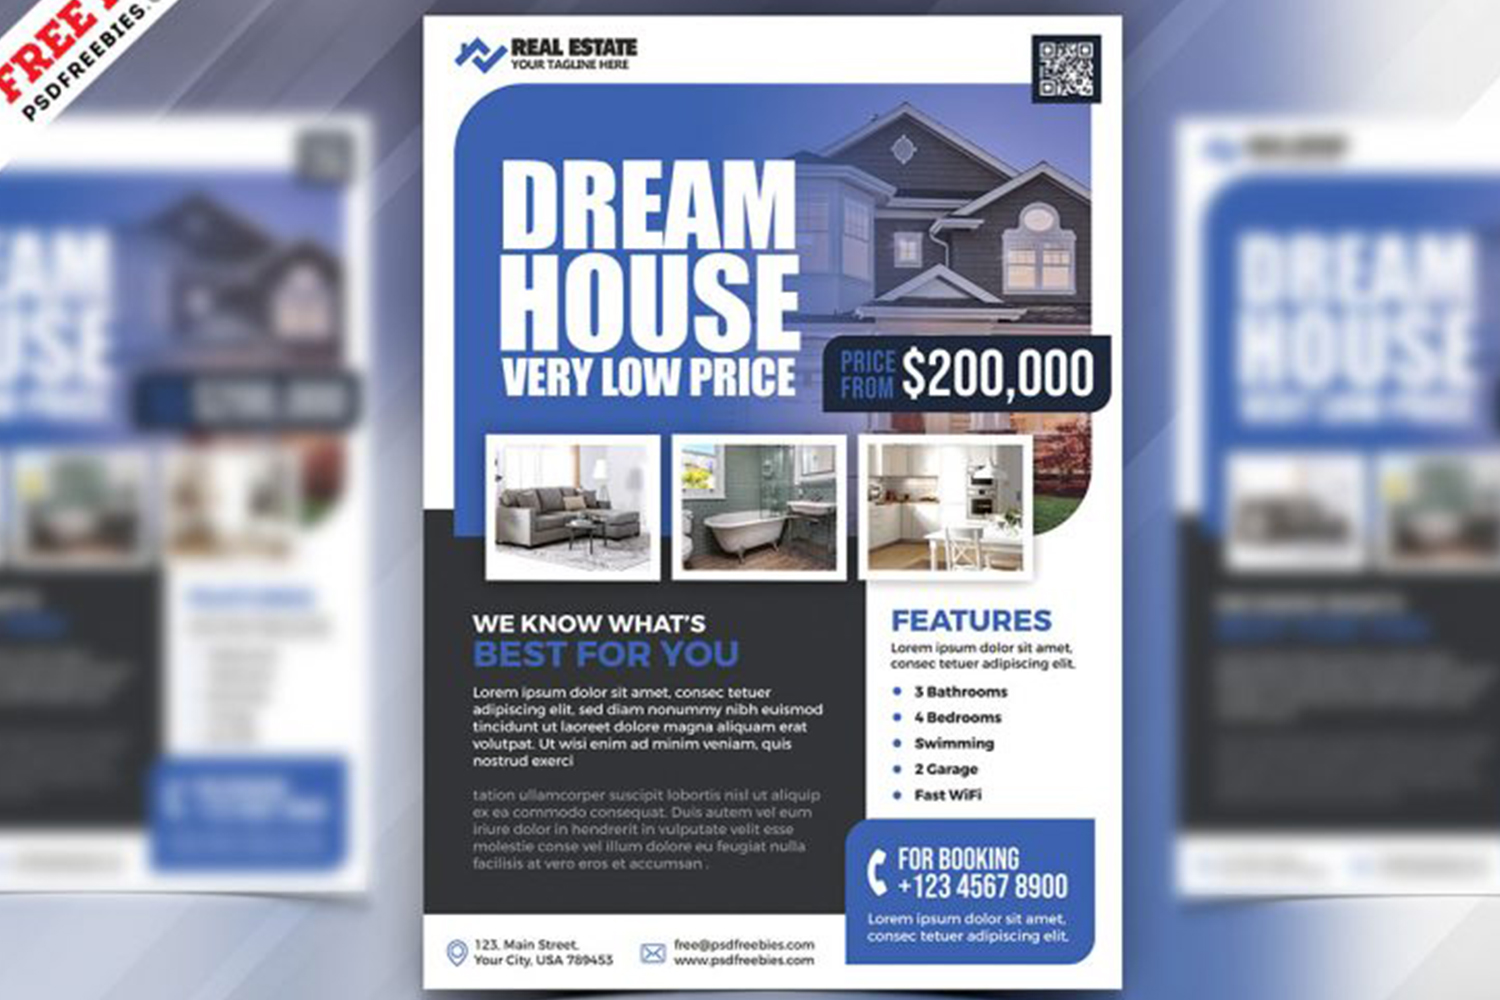 Real Estate Business Marketing Flyer PSD Free Download